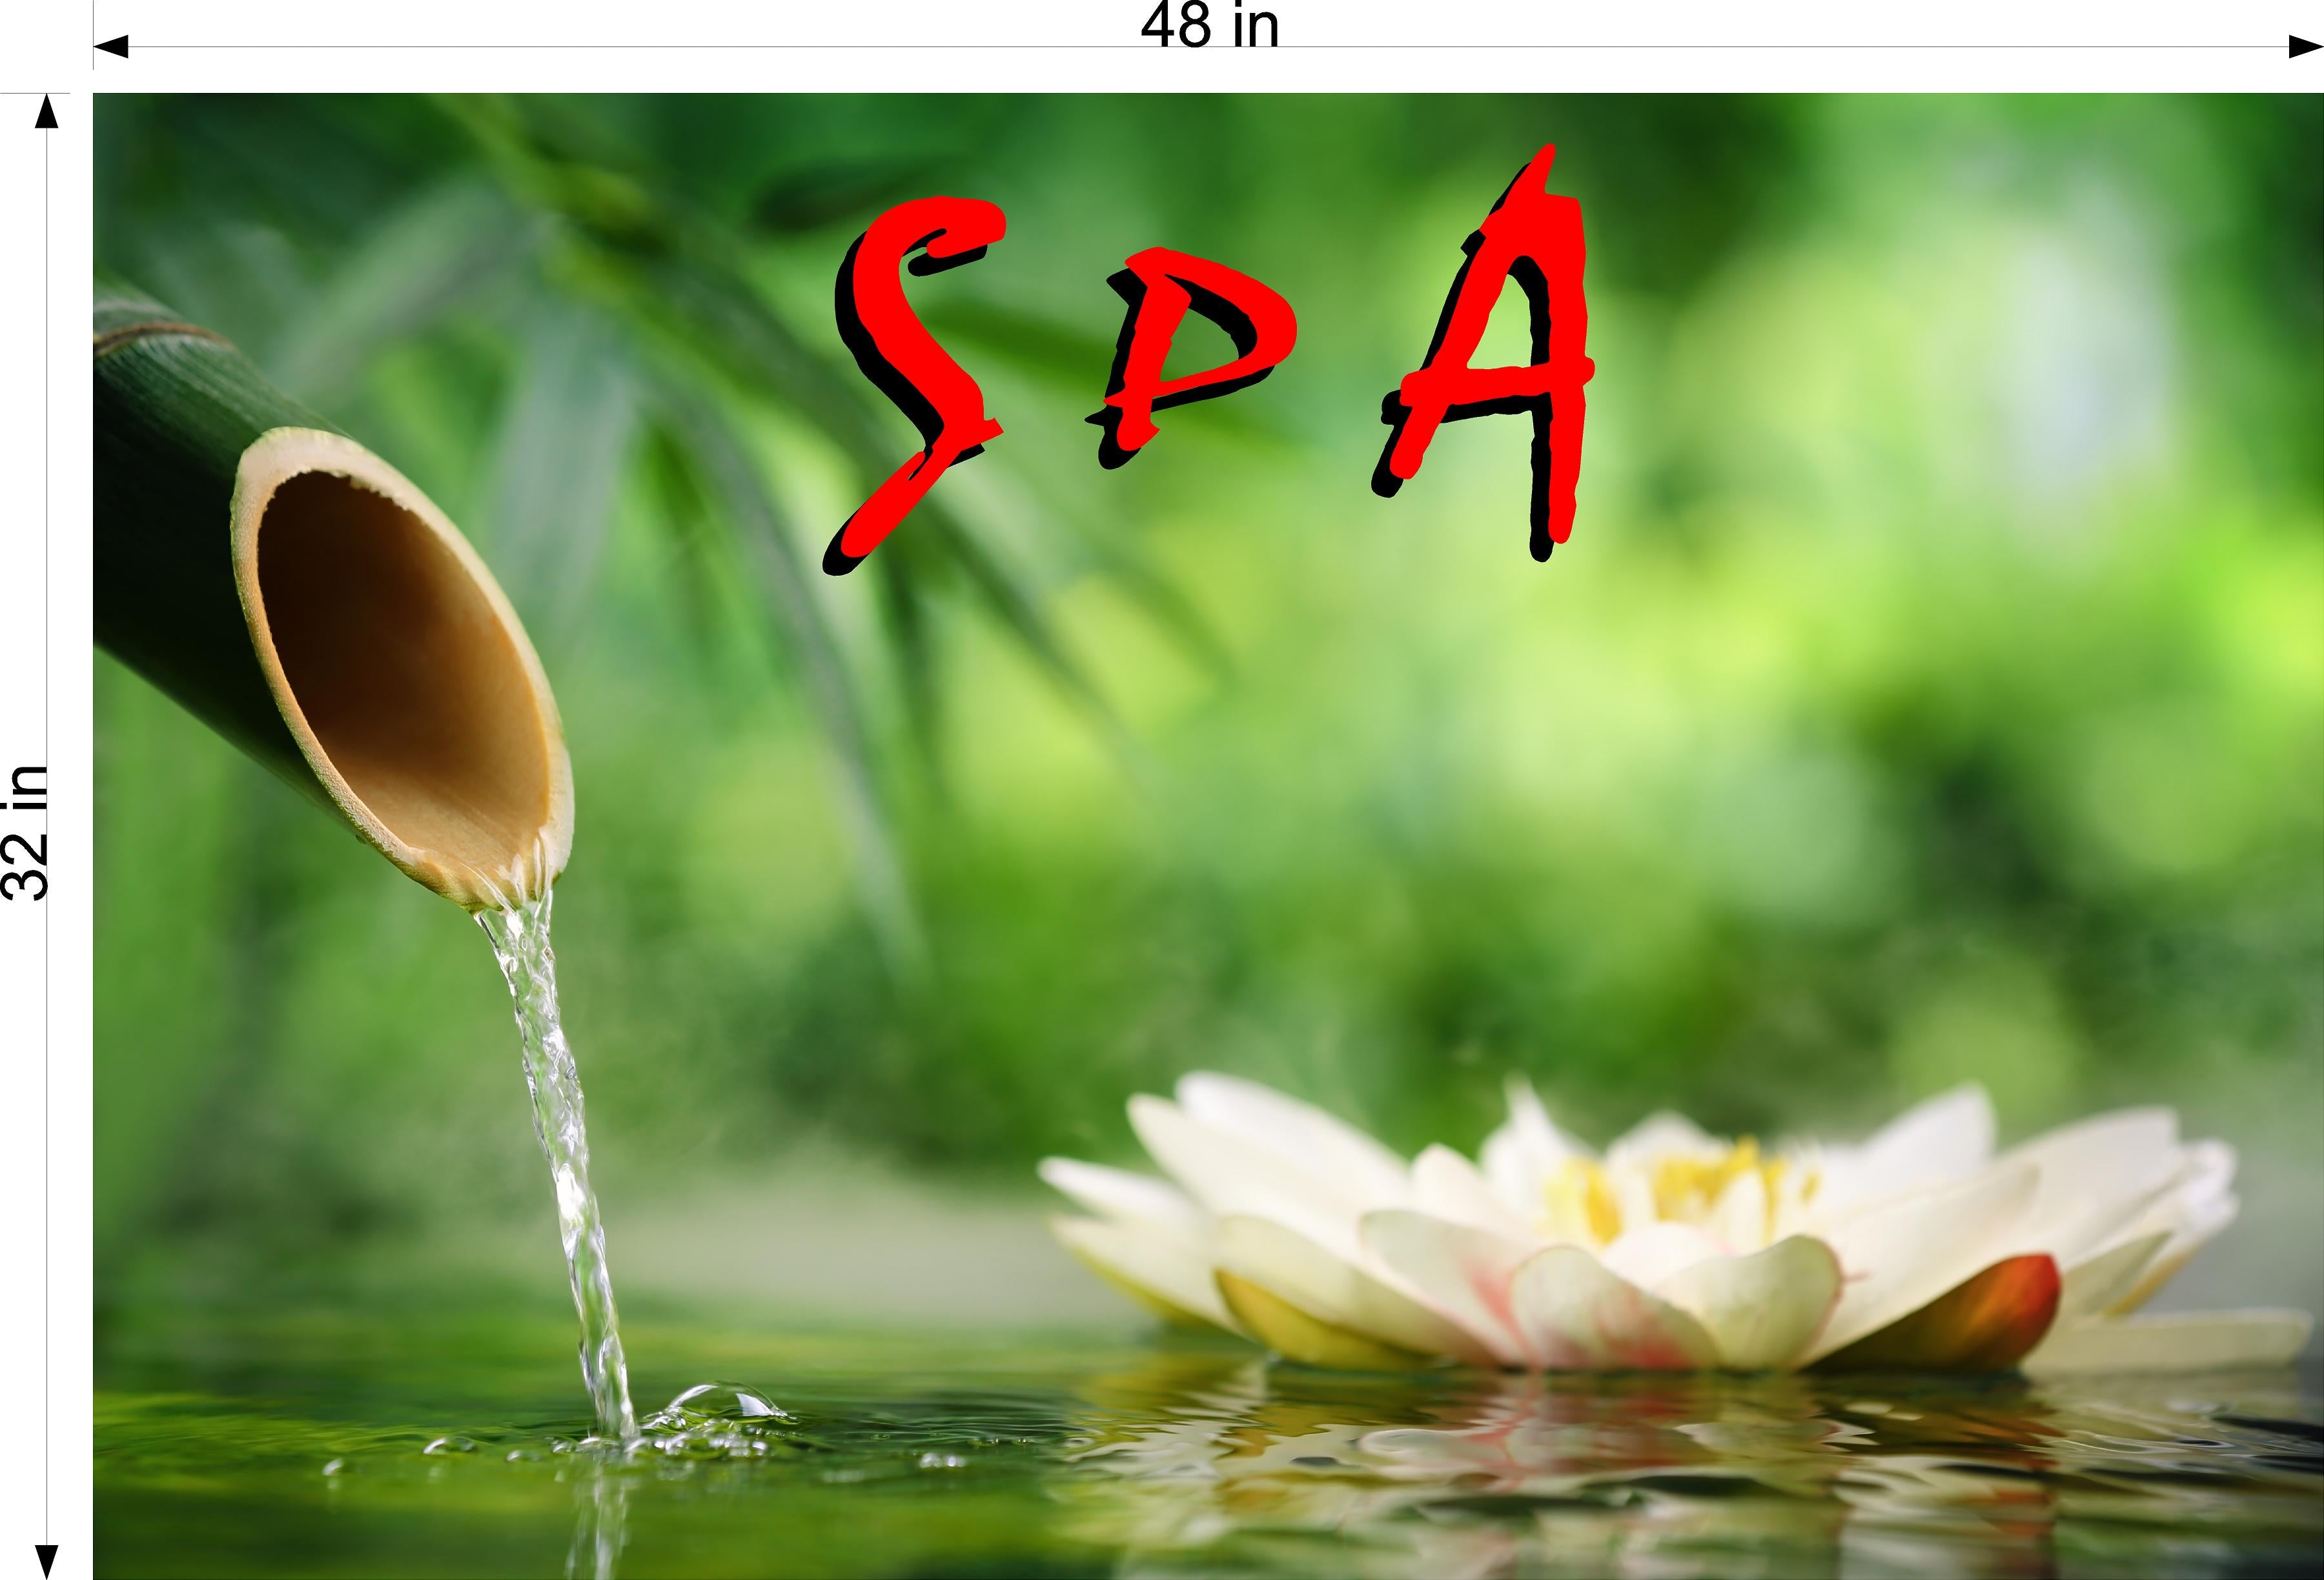 Spa 03 Wallpaper Poster Decal with Adhesive Backing Wall Sticker Decor Indoors Interior Sign Horizontal